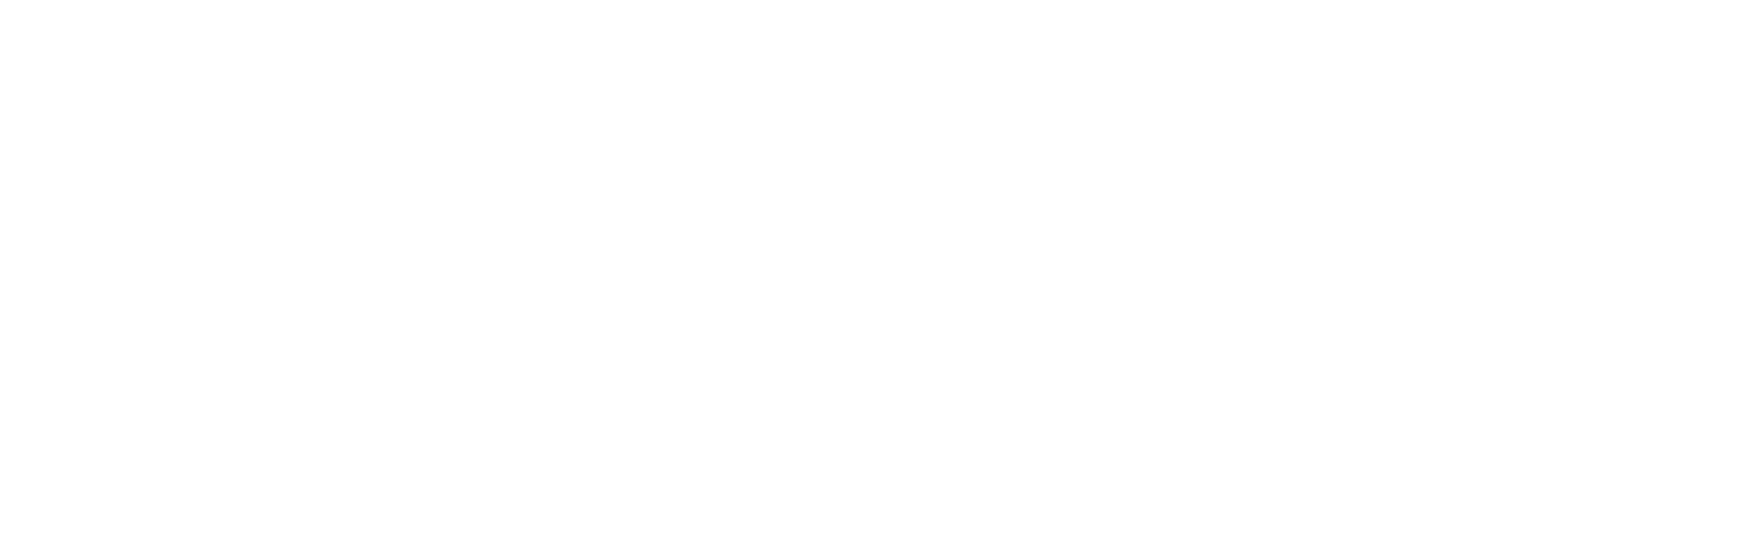 wingz fast and crunchy